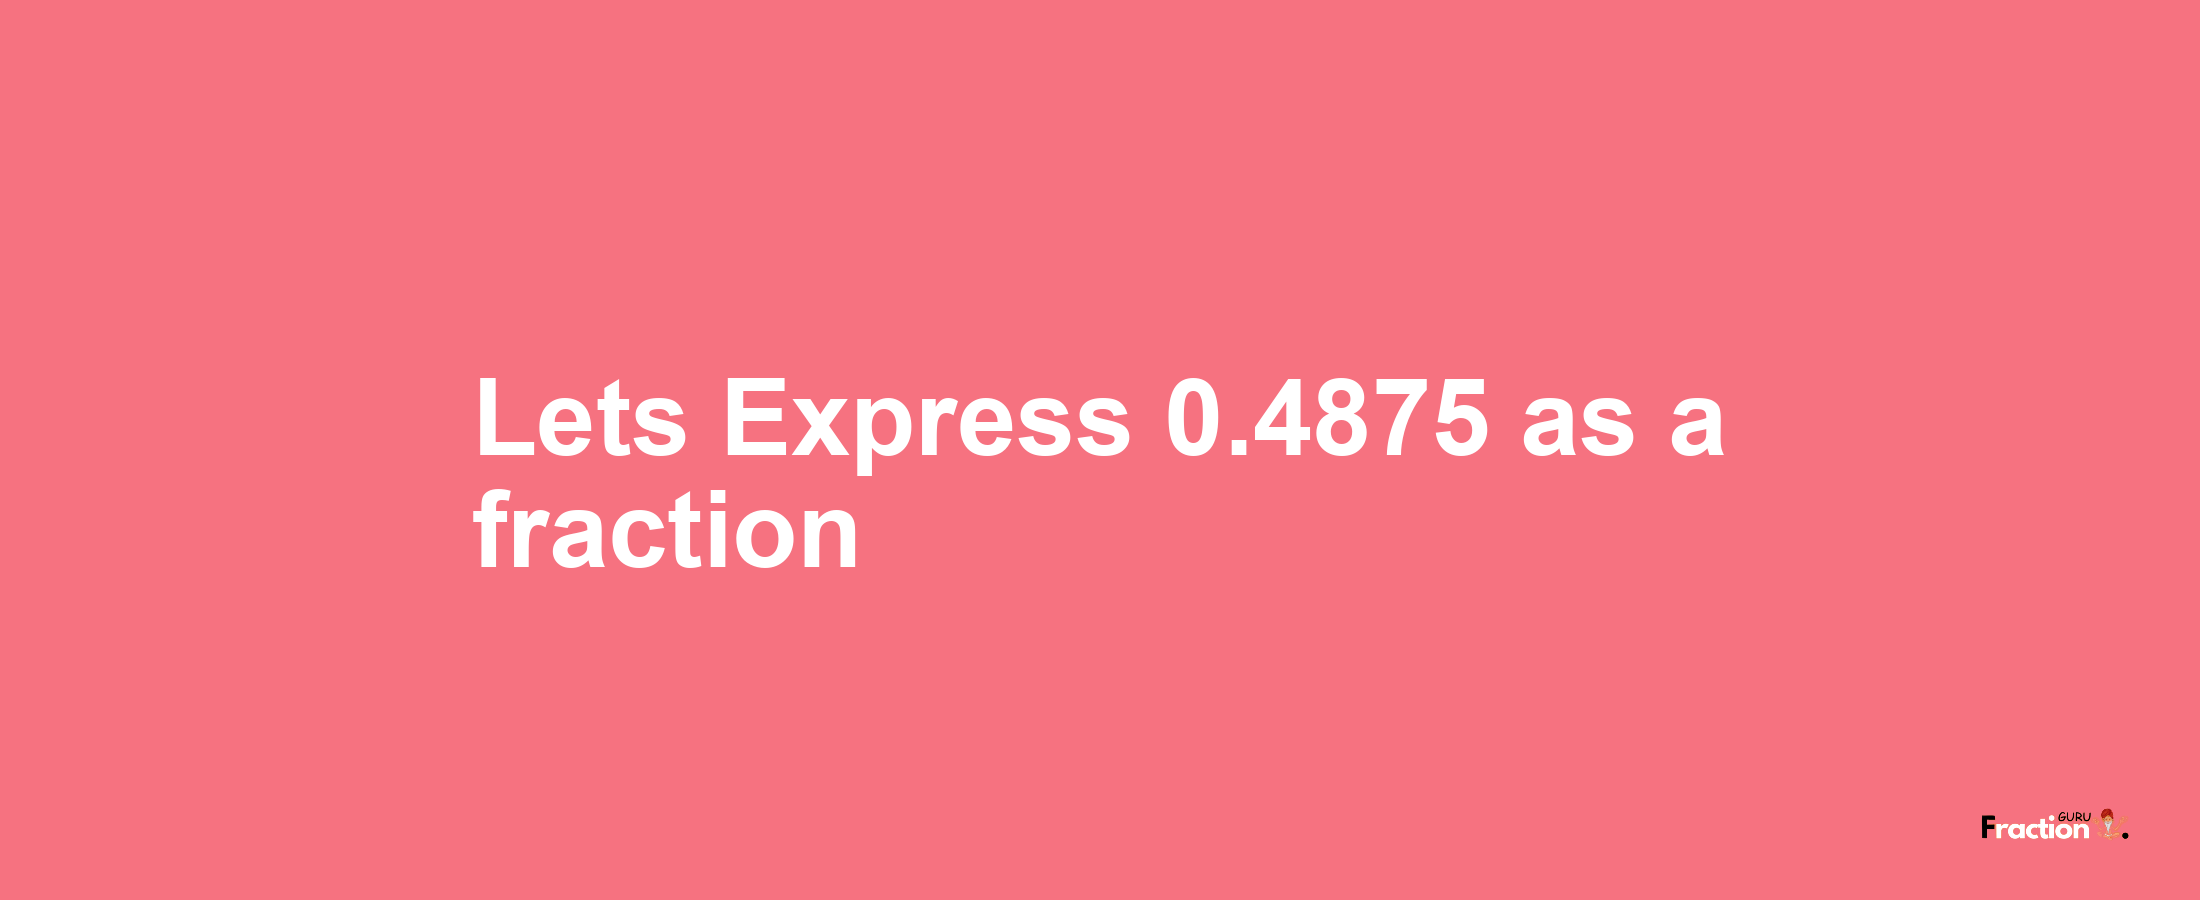 Lets Express 0.4875 as afraction